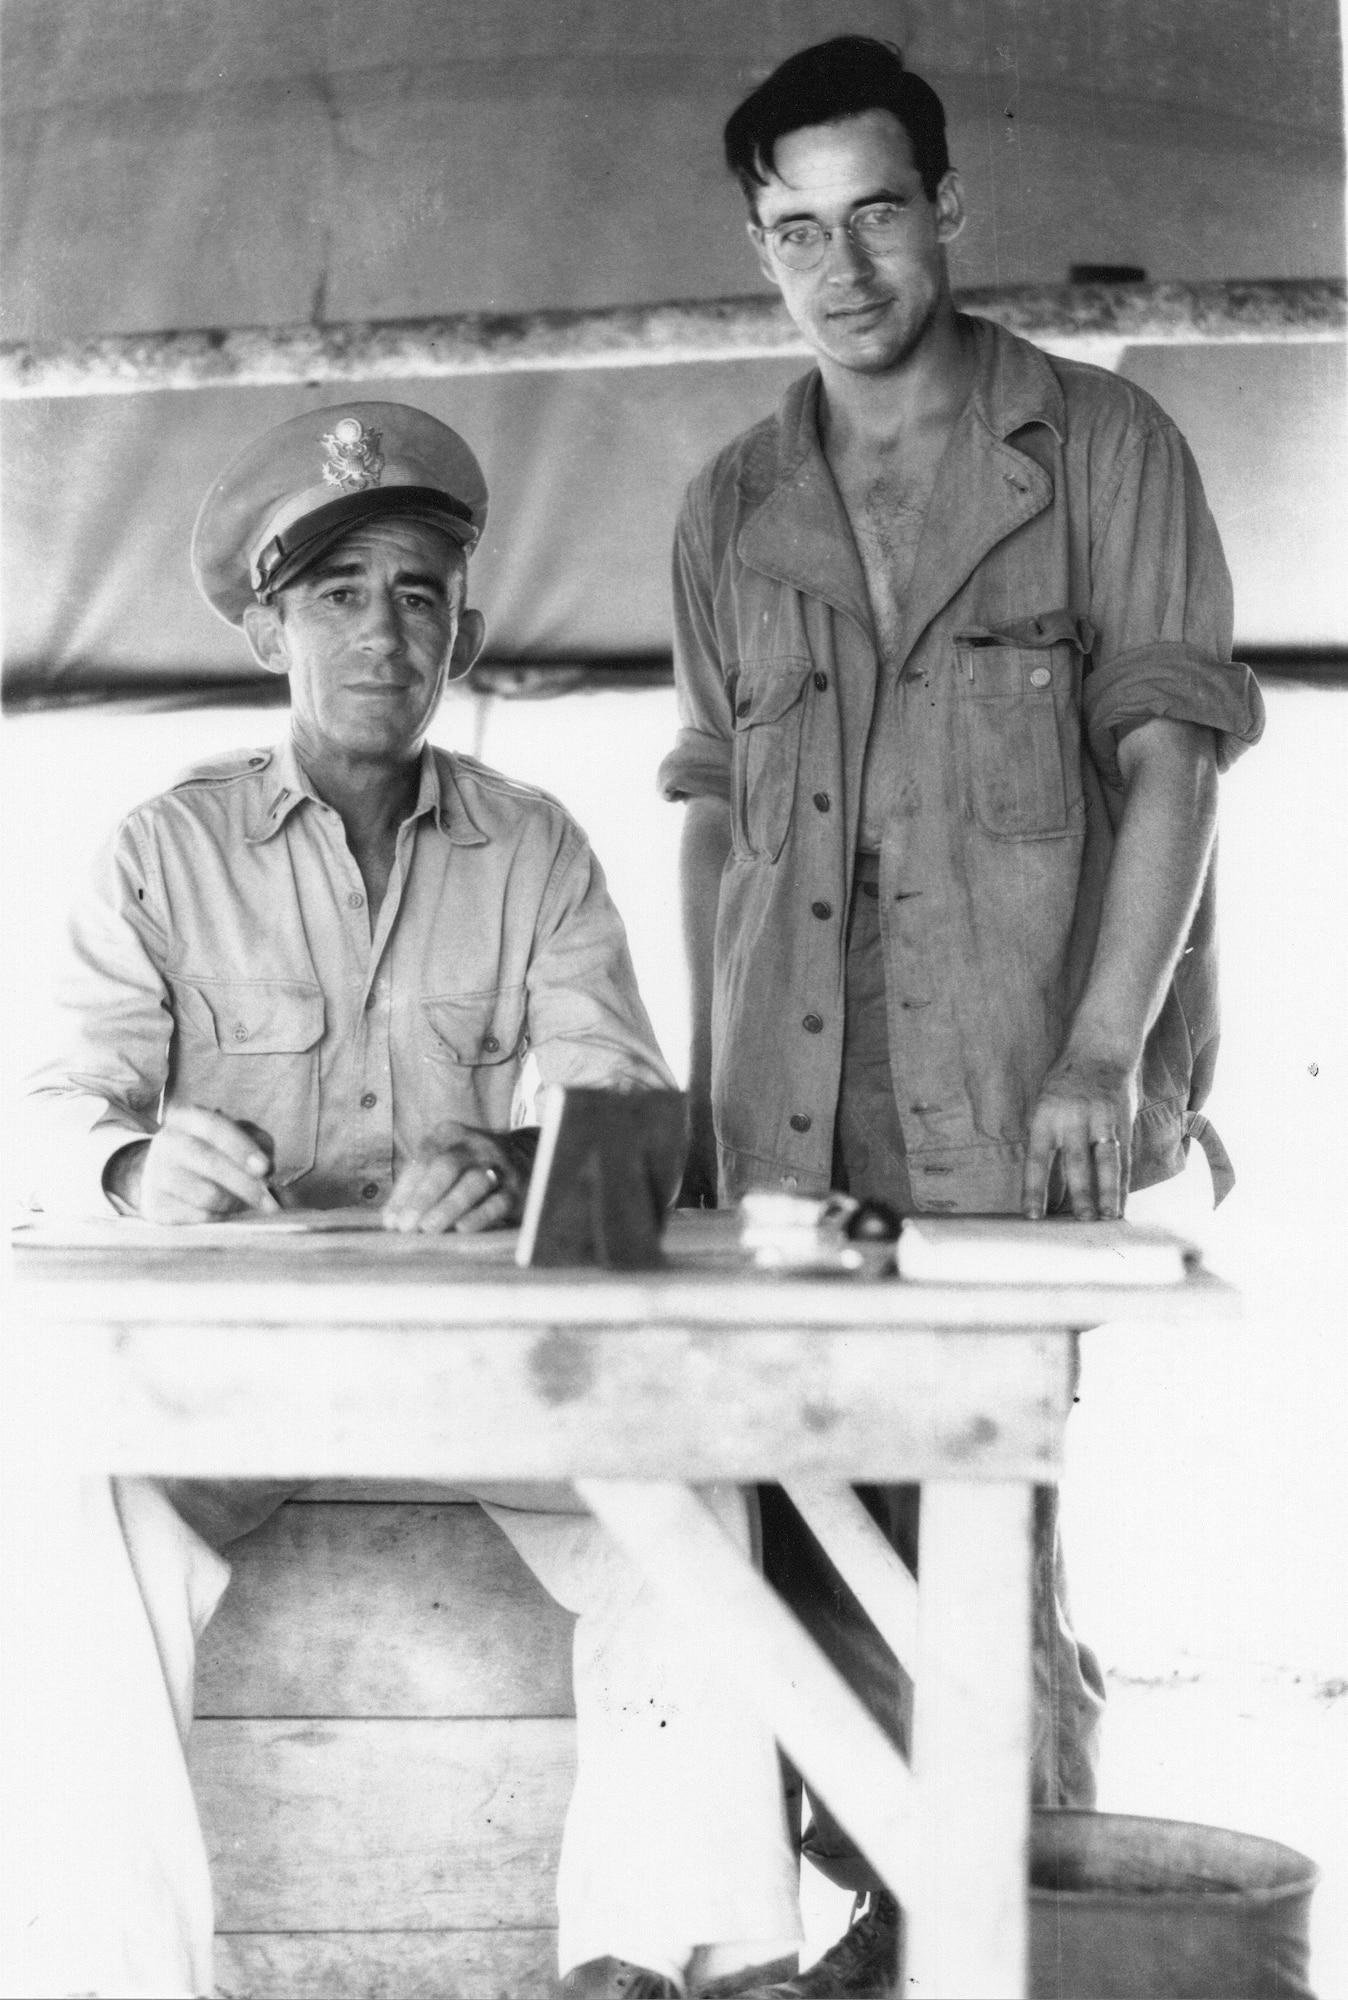 Sgt. Fred H. Hill, 17th Reconnaissance Squadron (Bombardment), stands by 1st Lt. John P. O'Keefe, assigned to a Military Police unit, on Biak Island in 1944.  O’Keefe was the original First Sergeant of the 123rd Observation Squadron before being selected for Officer Candidate School during the war.  (Courtesy Mr. Fred Hill)